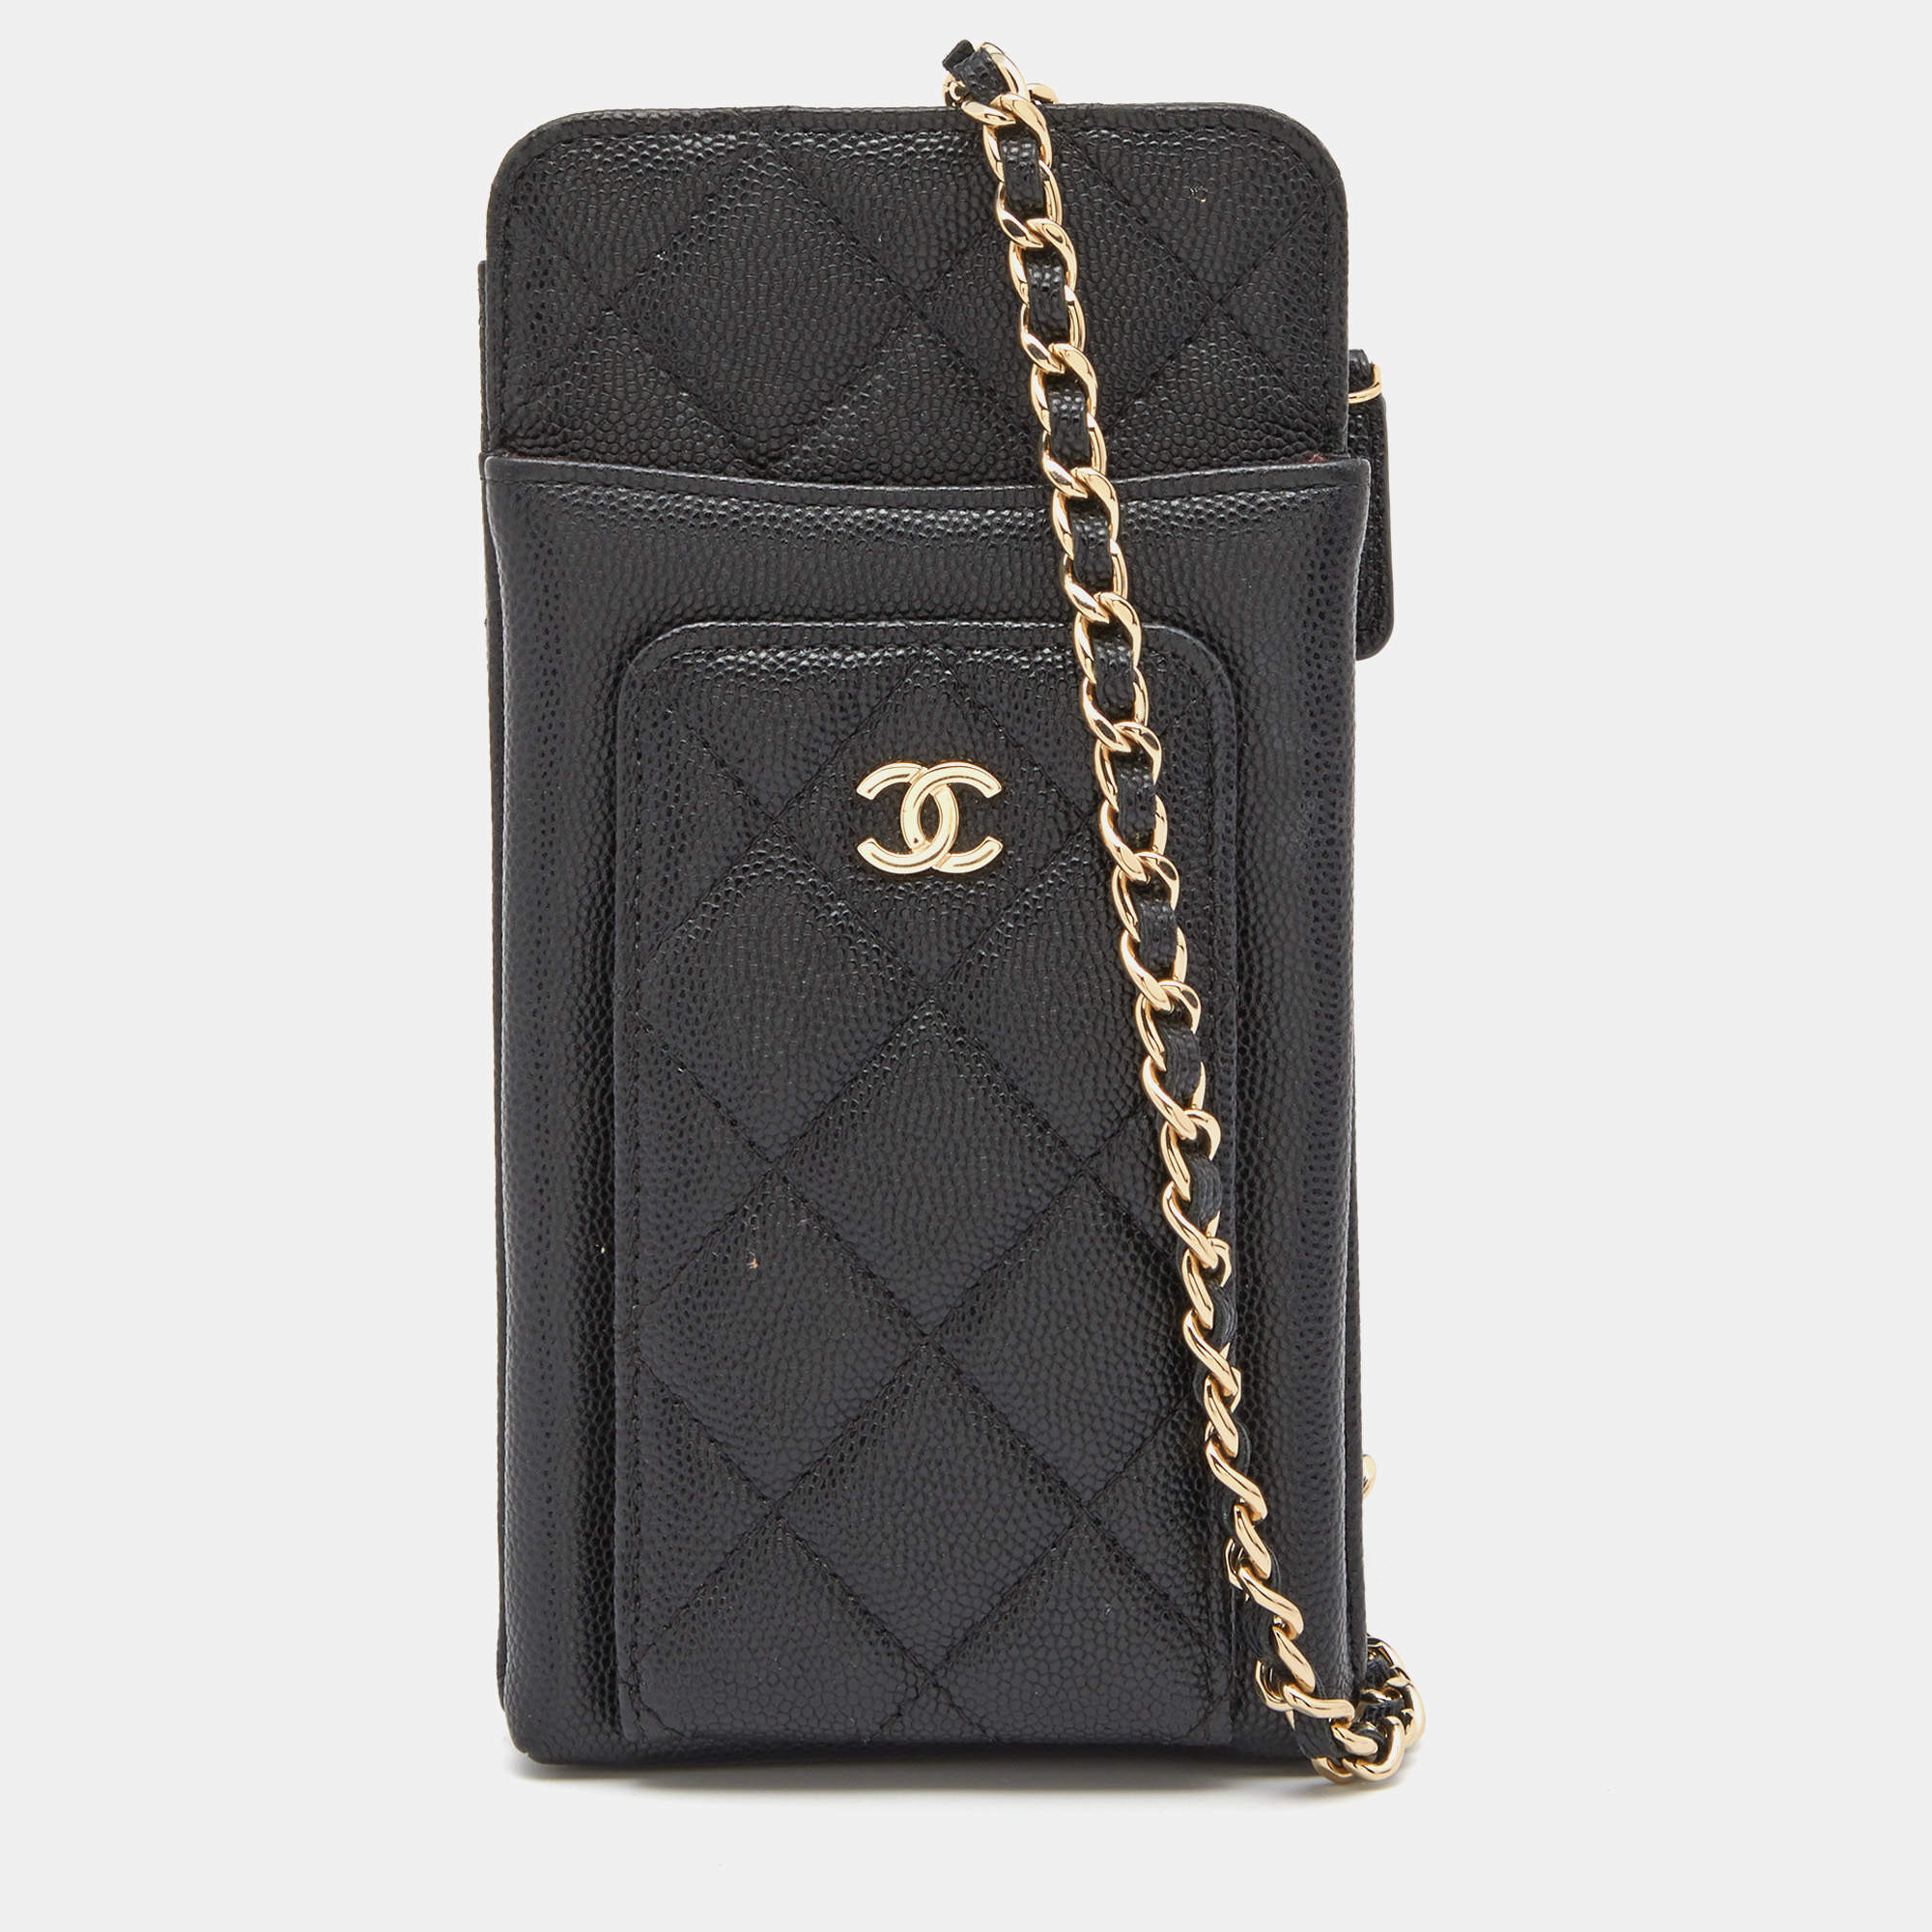 Chanel Black Quilted Caviar Leather Phone Holder Crossbody Bag Chanel